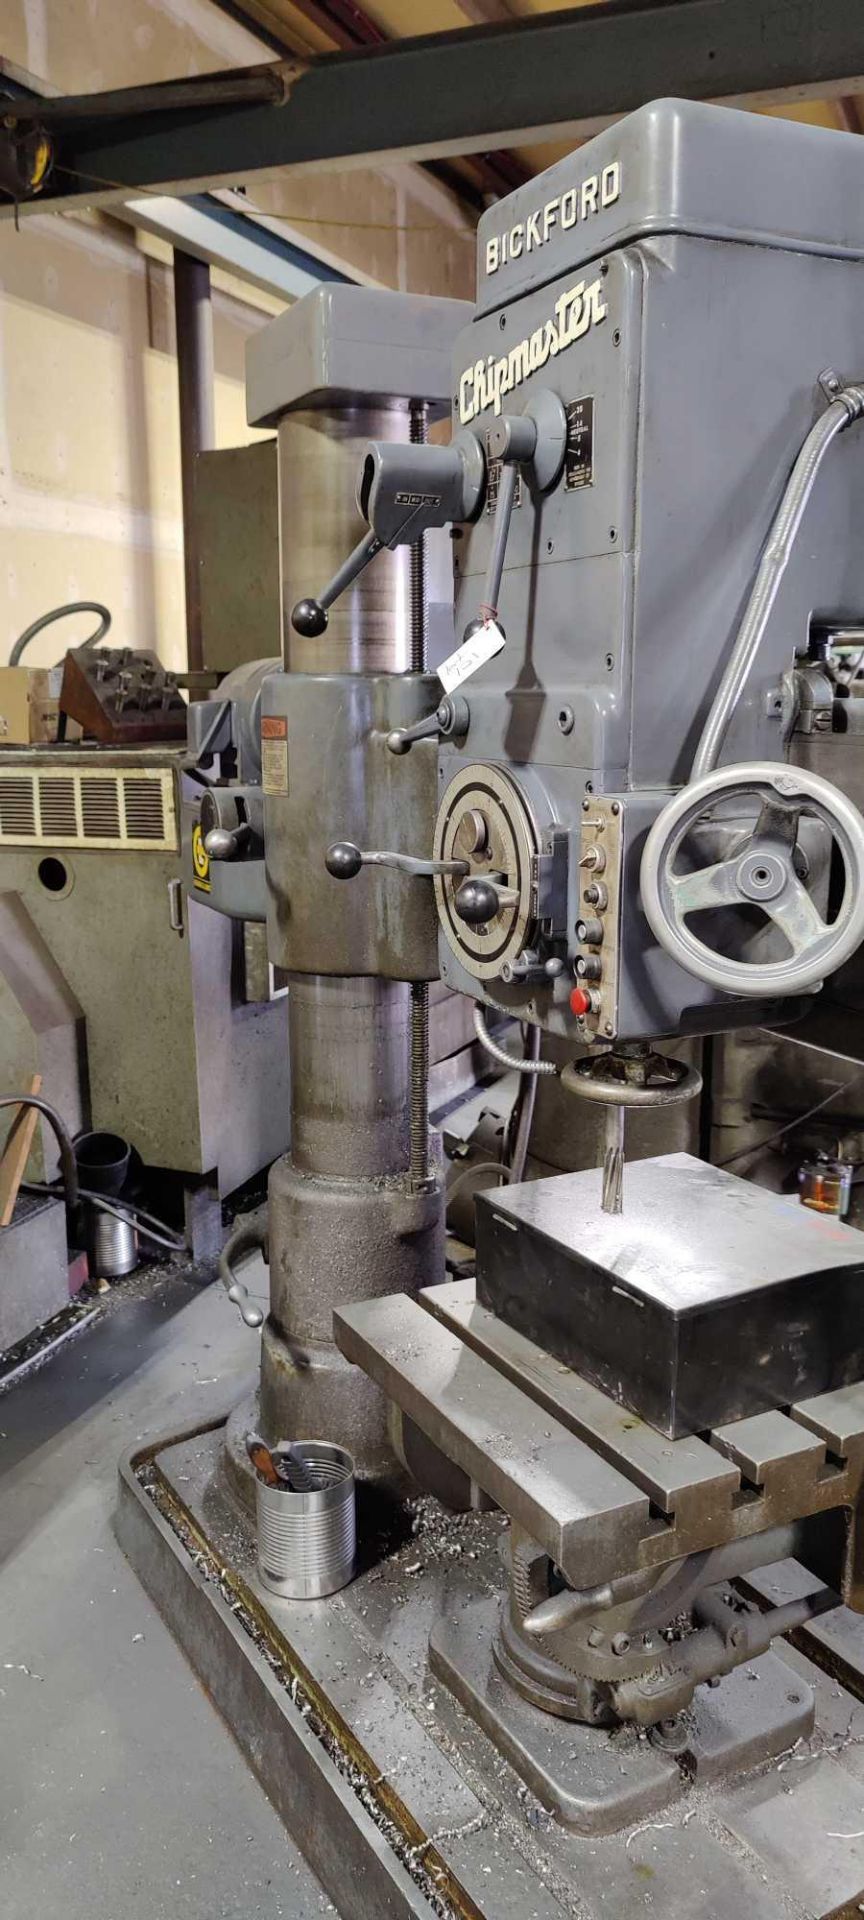 Giddings and lewis radial arm drill - Image 2 of 5